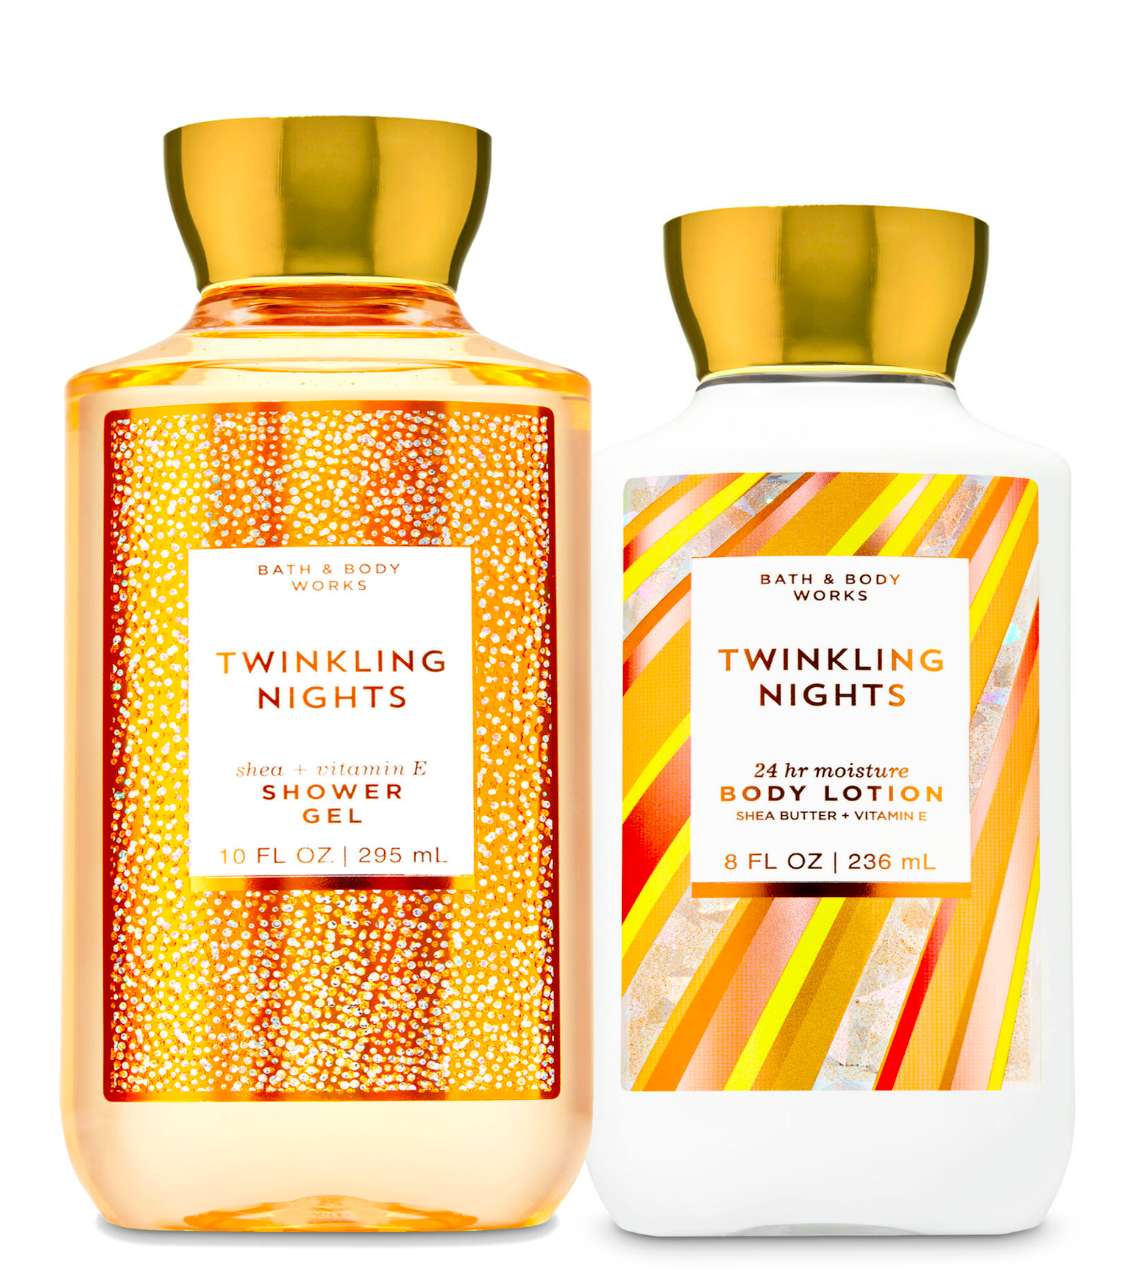 Primary image for Bath & Body Works Twinkling Night Body Lotion + Shower Gel Duo Set